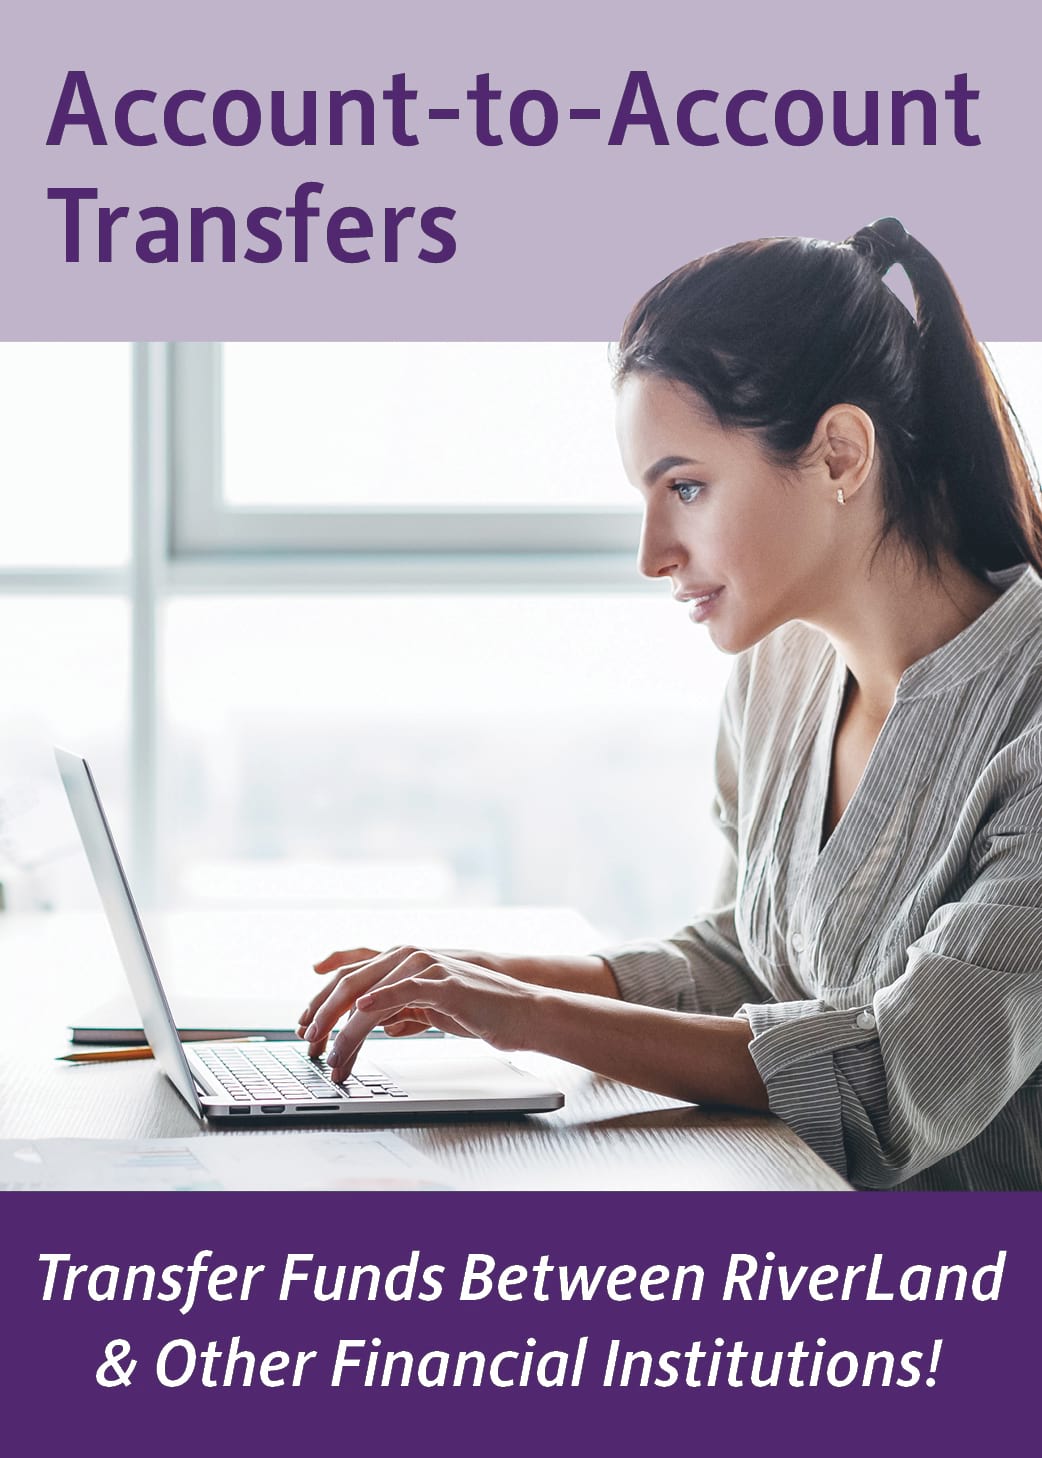 Account to Account Transfers